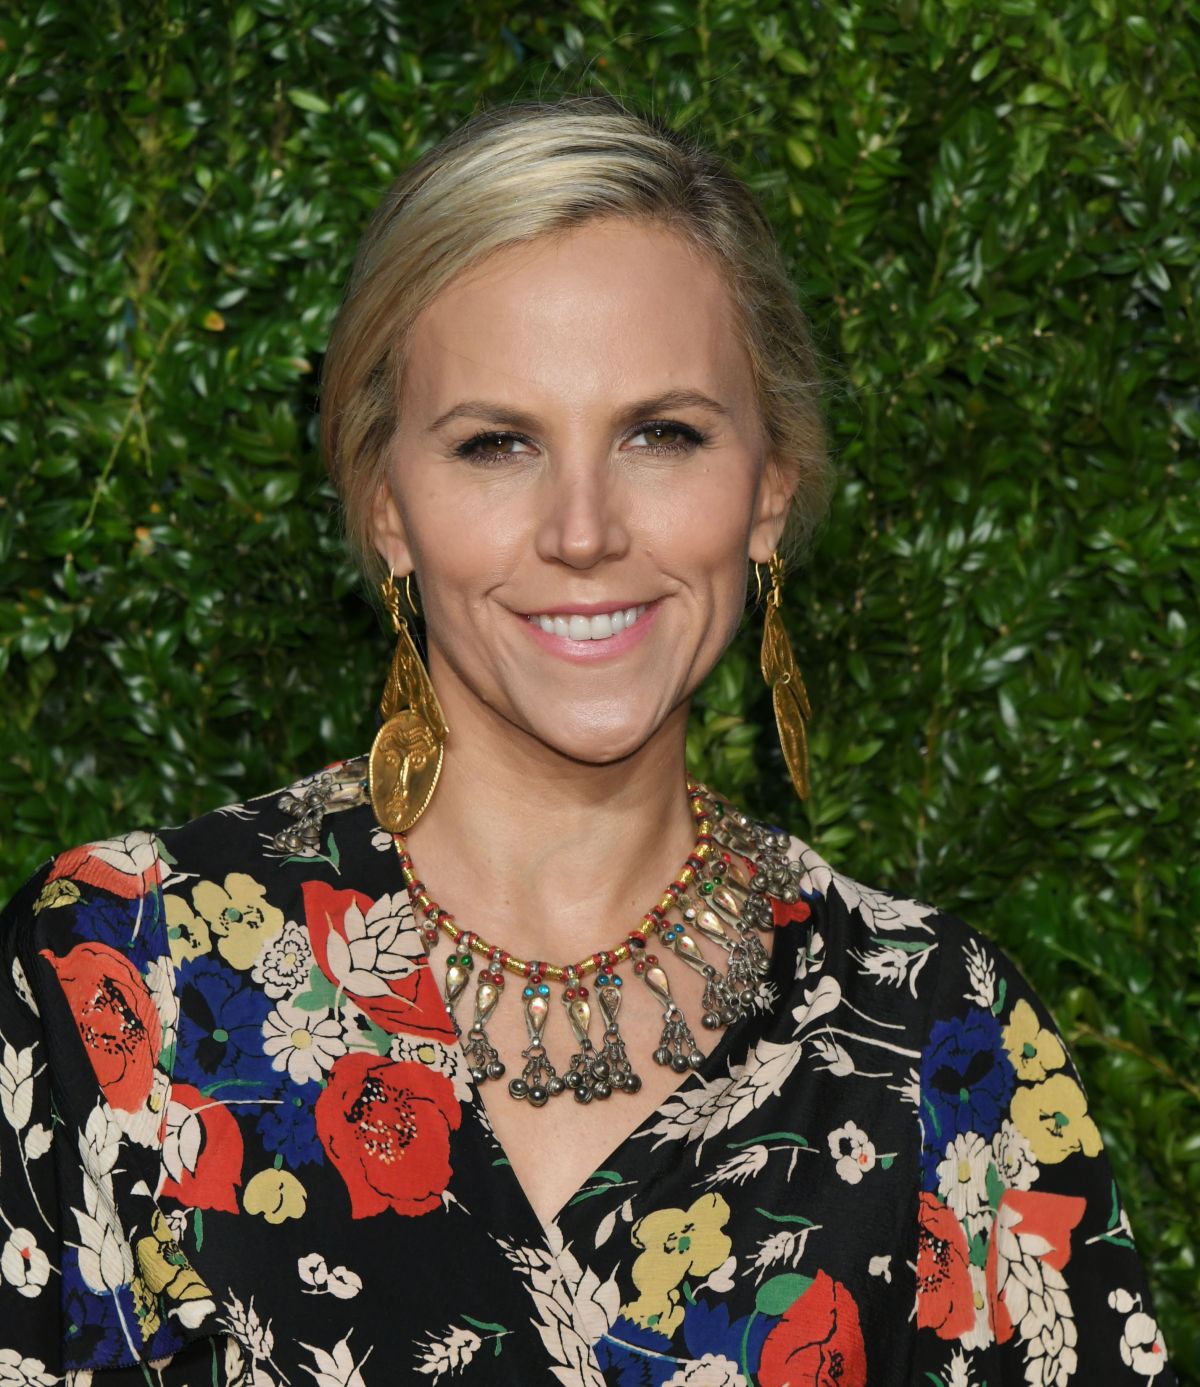 TORY BURCH at Chanel Artists Dinner at Tribeca Film Festival in New ...